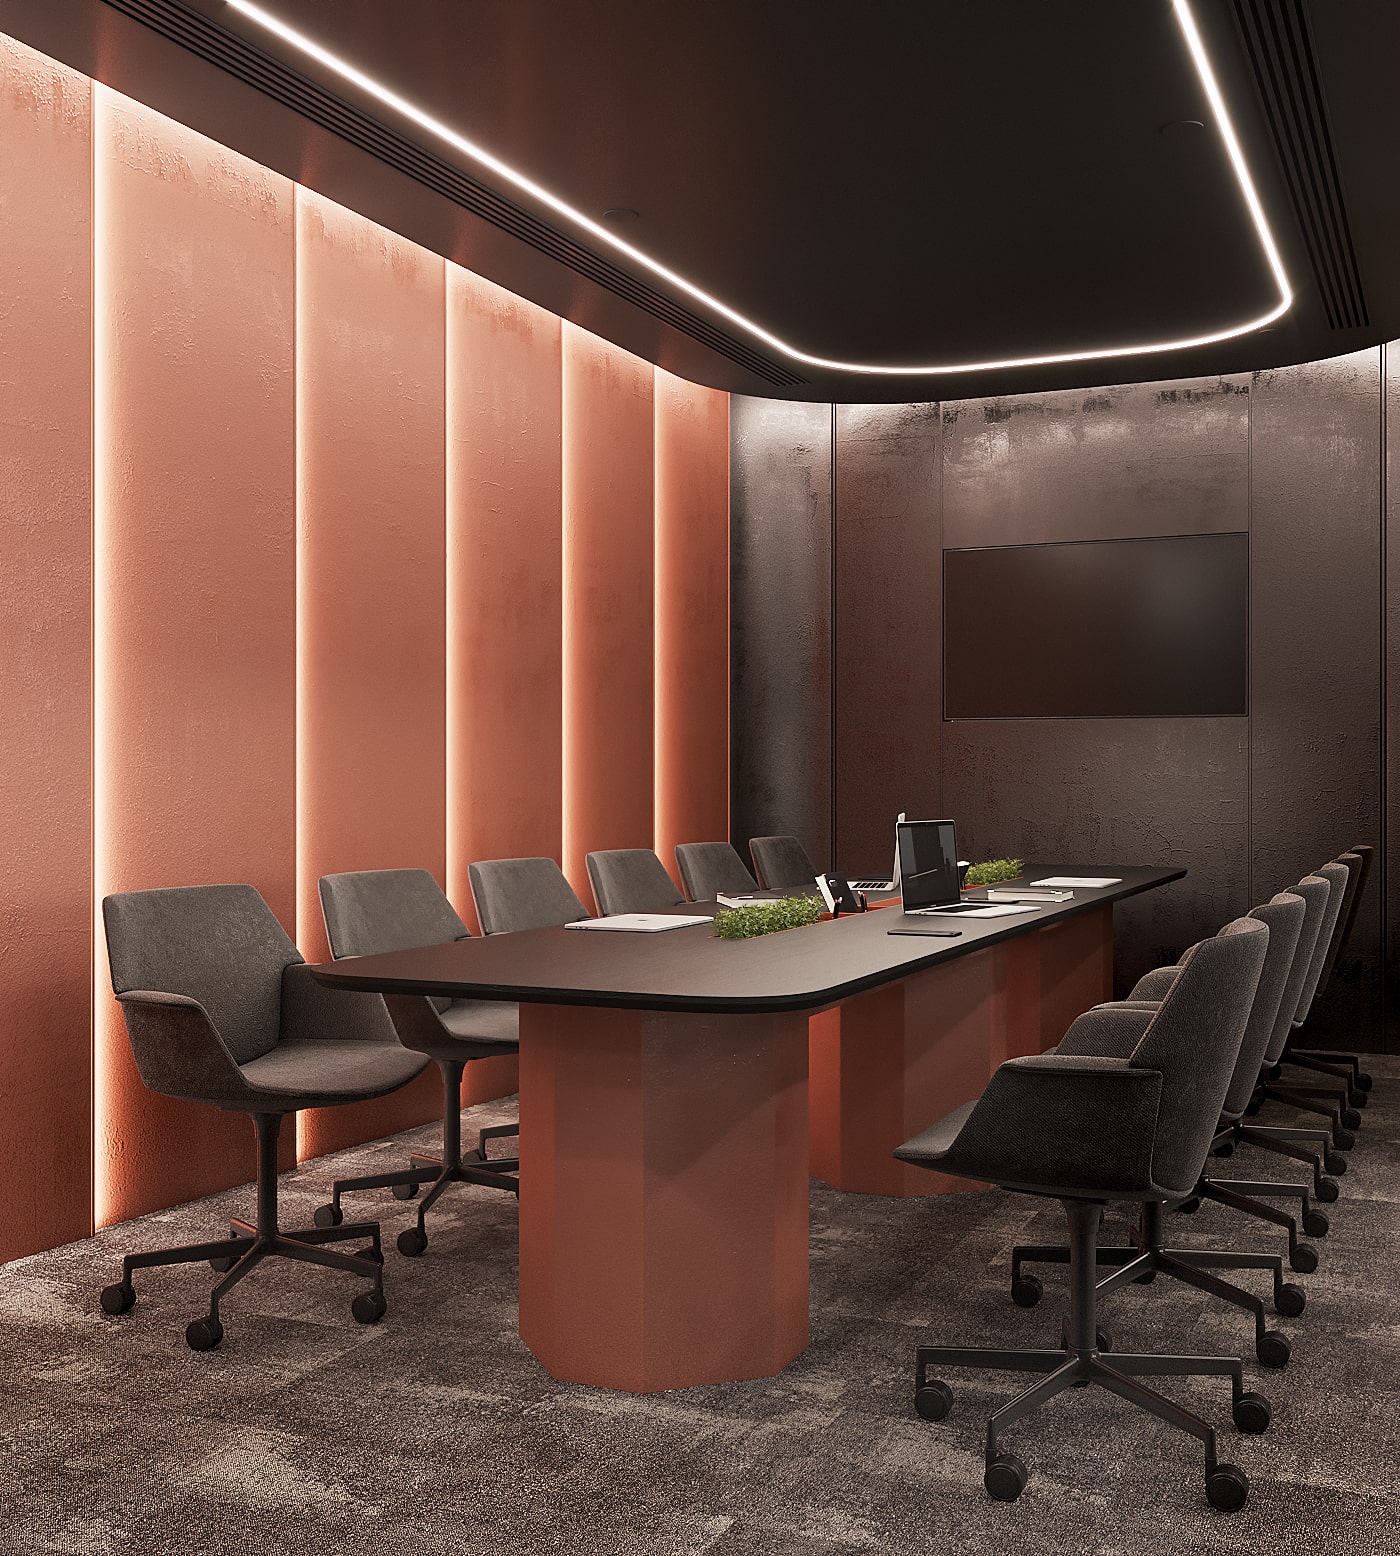 Interior design of conference rooms 3